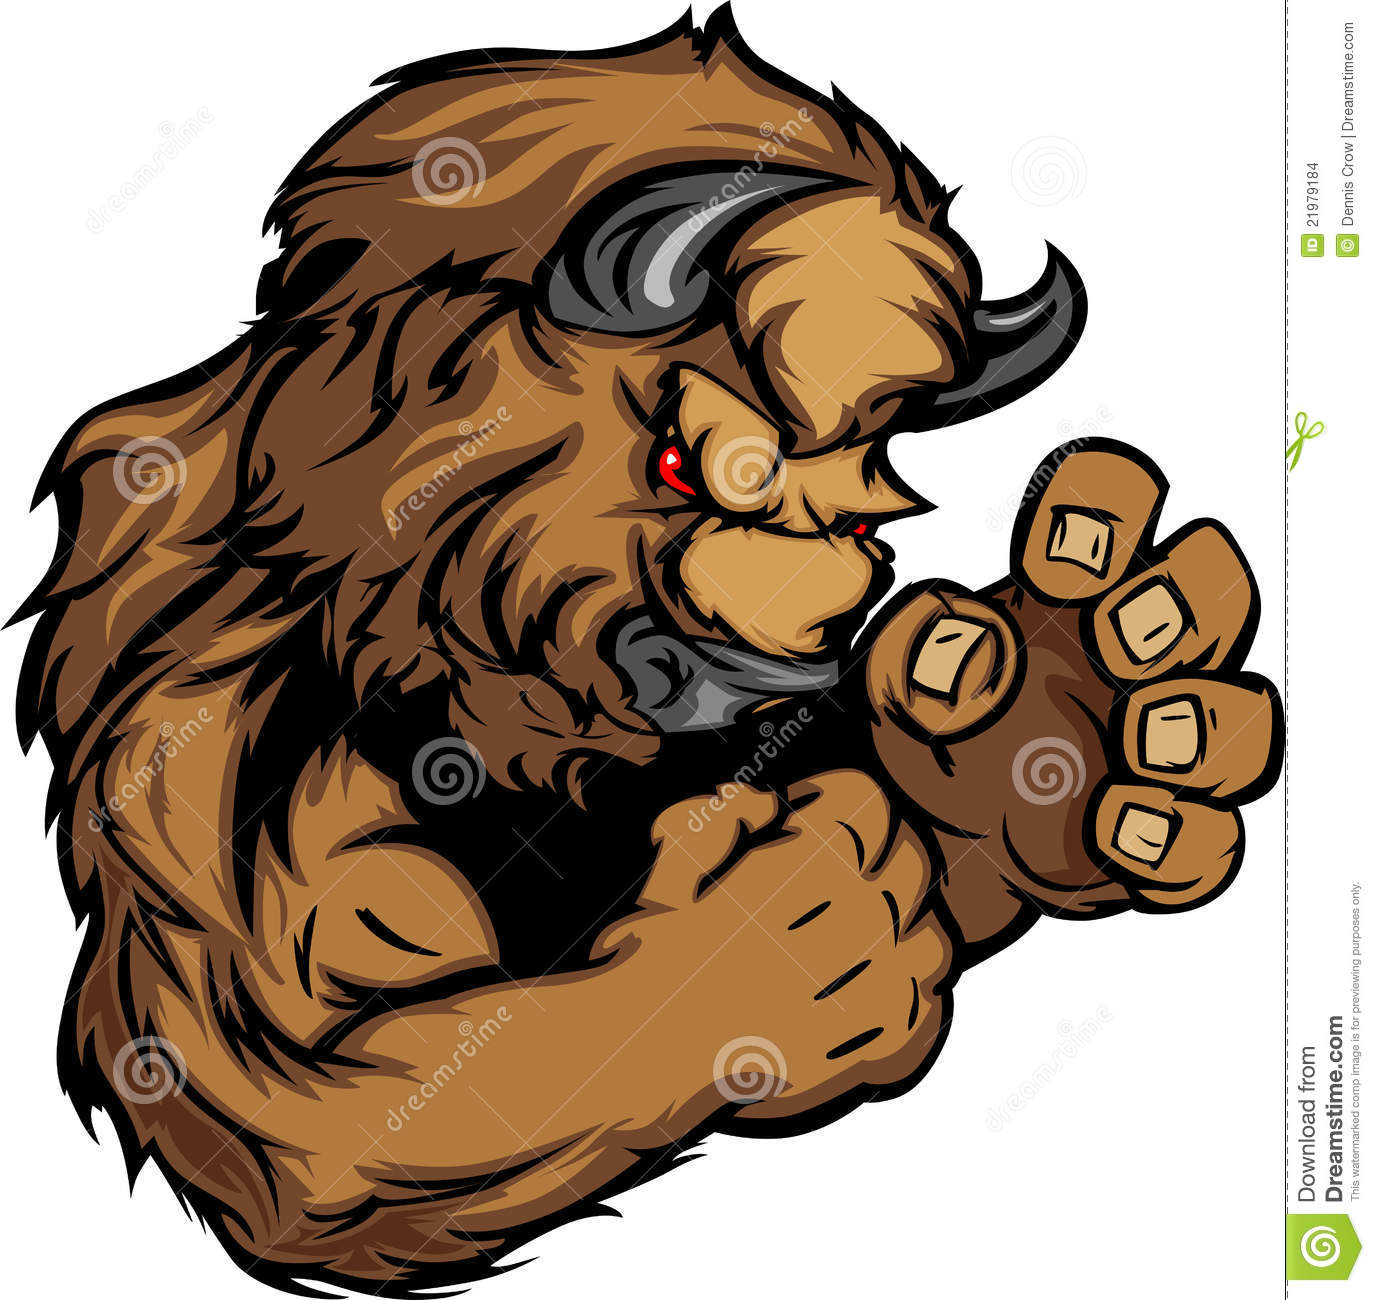 Graphic Image Of A Bison Or Buffalo Mascot Stock Images   Image